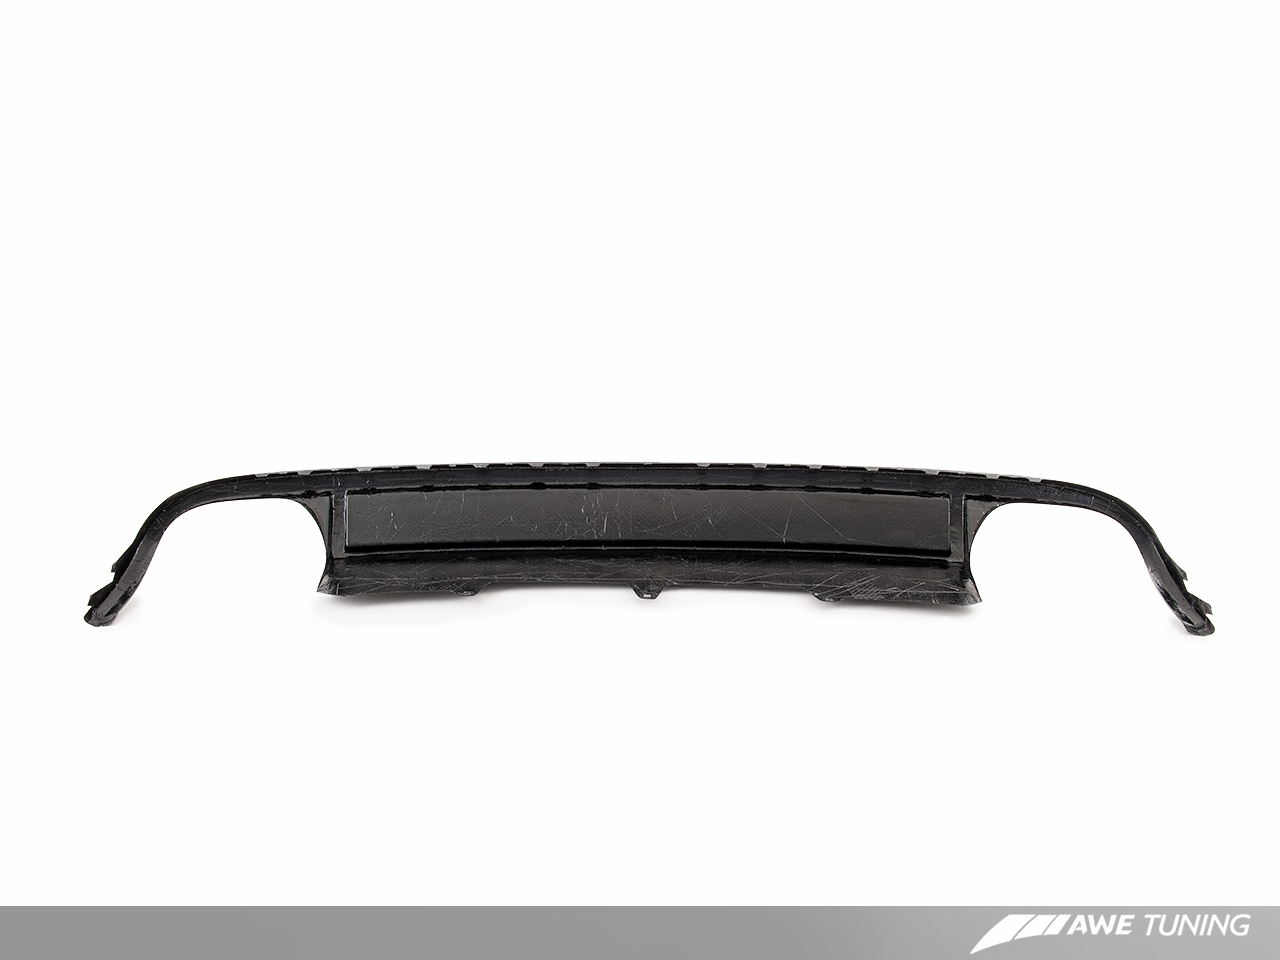 AWE Quad Outlet Bumper Conversion Kit W/ Lower Valance and Trim Strip for B8 A4 2.0T Sedan - S-Line Cars